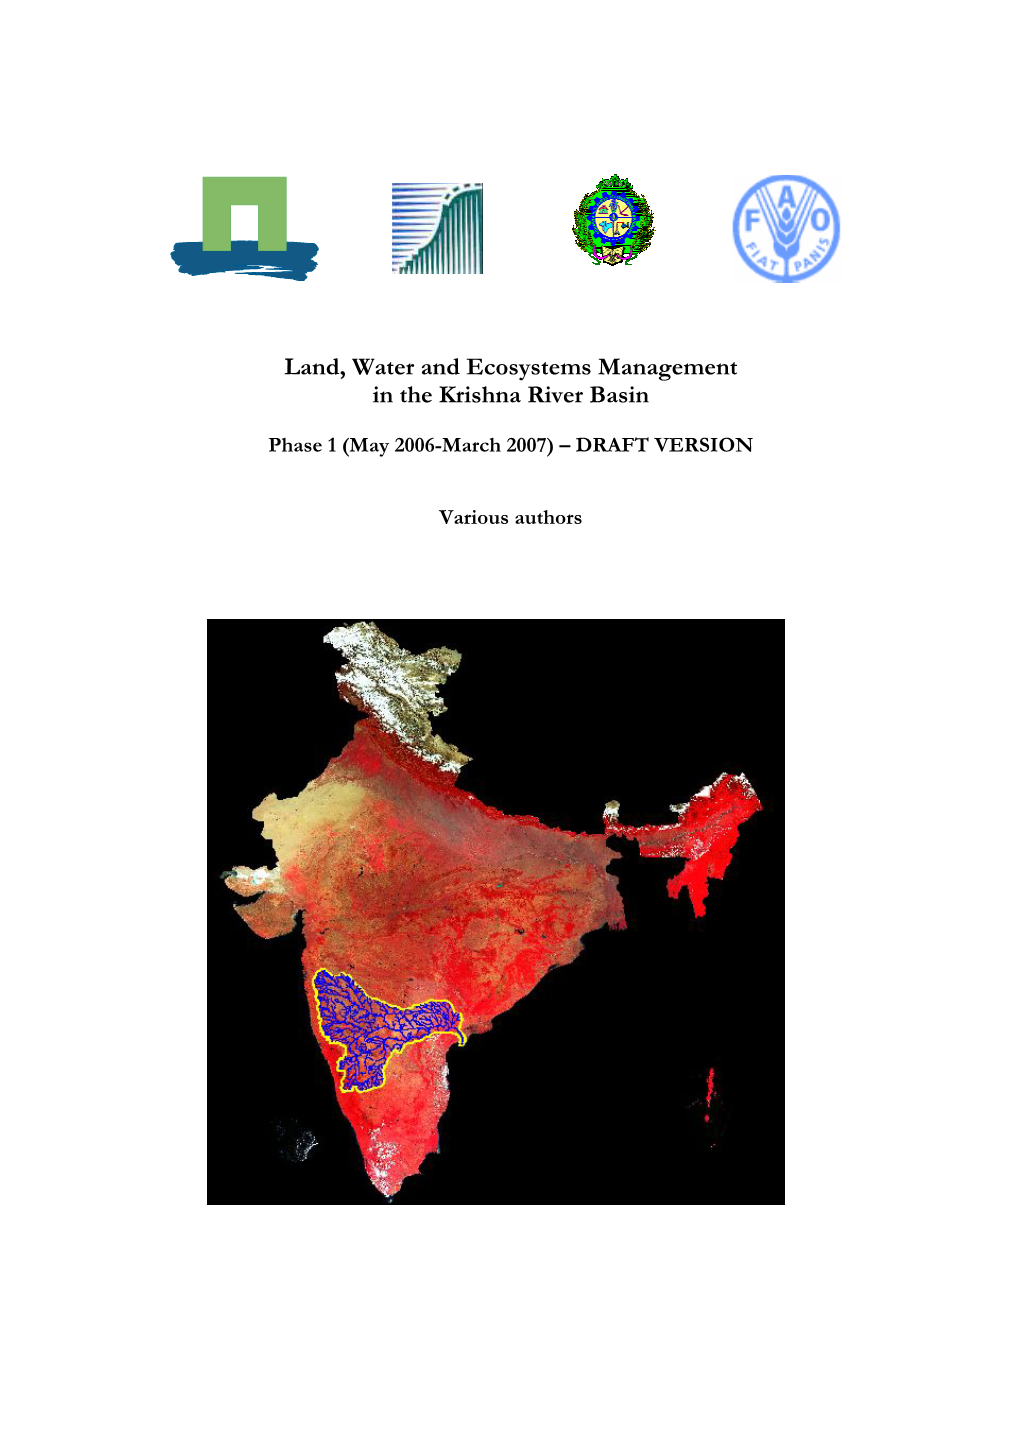 Land, Water and Ecosystems Management in the Krishna River Basin